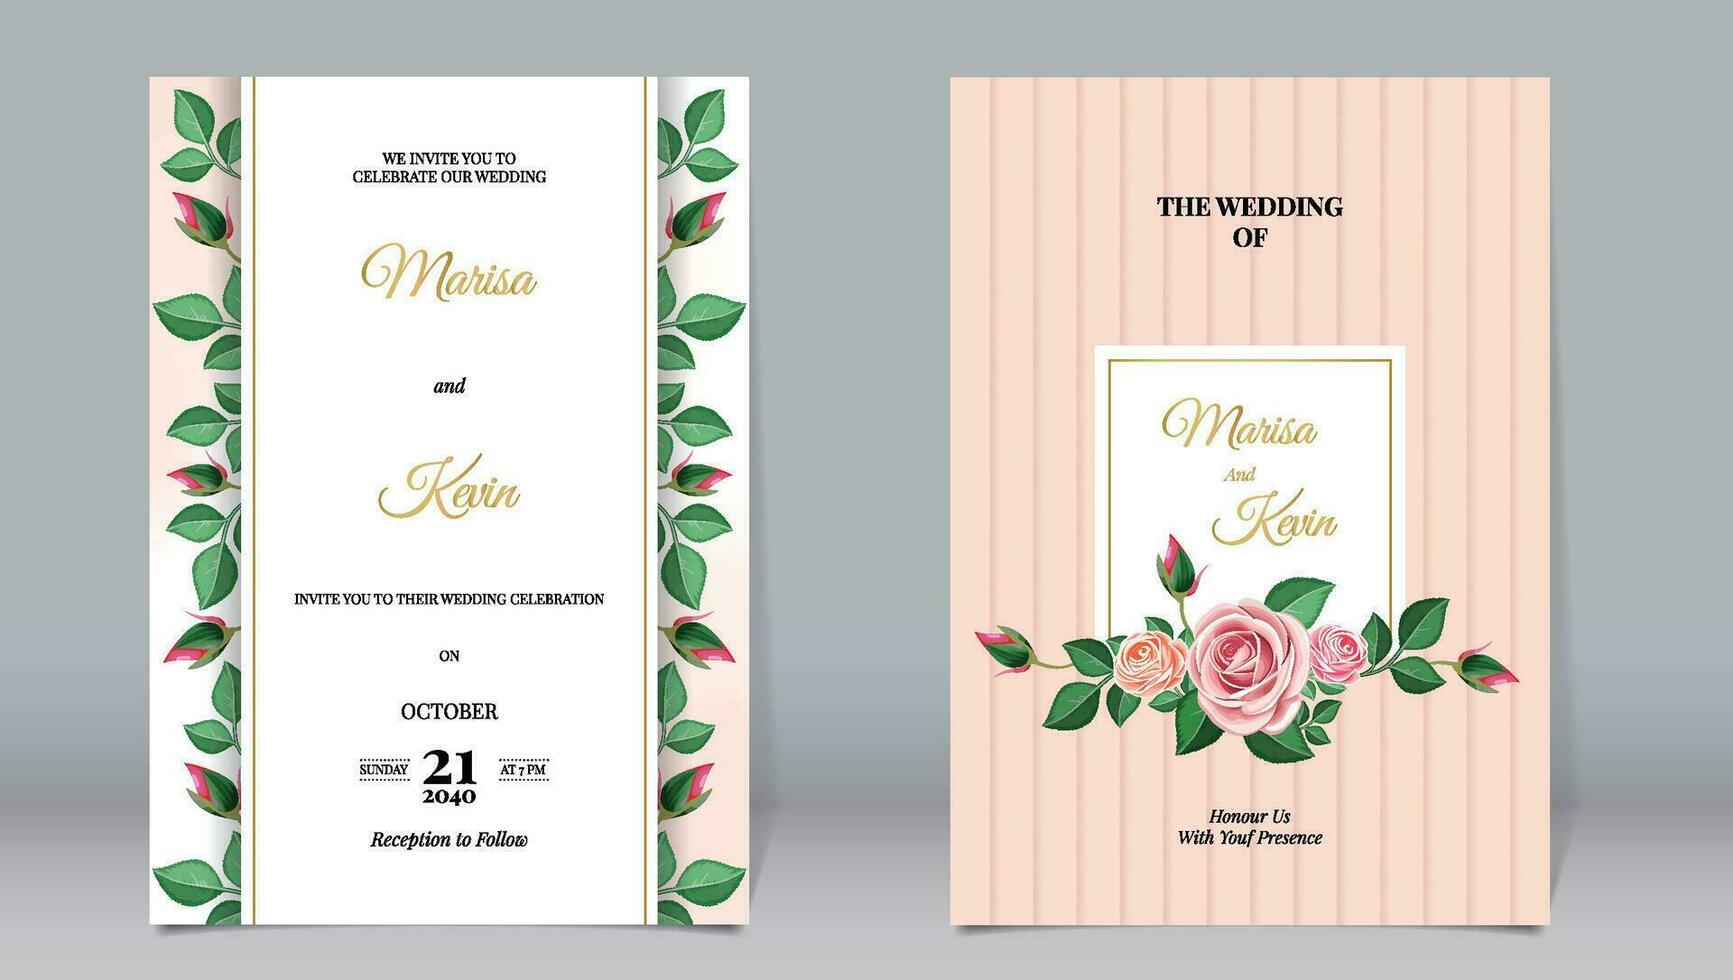 Luxury wedding invitation with beautiful roses and line ornaments on a simple minimalist background vector